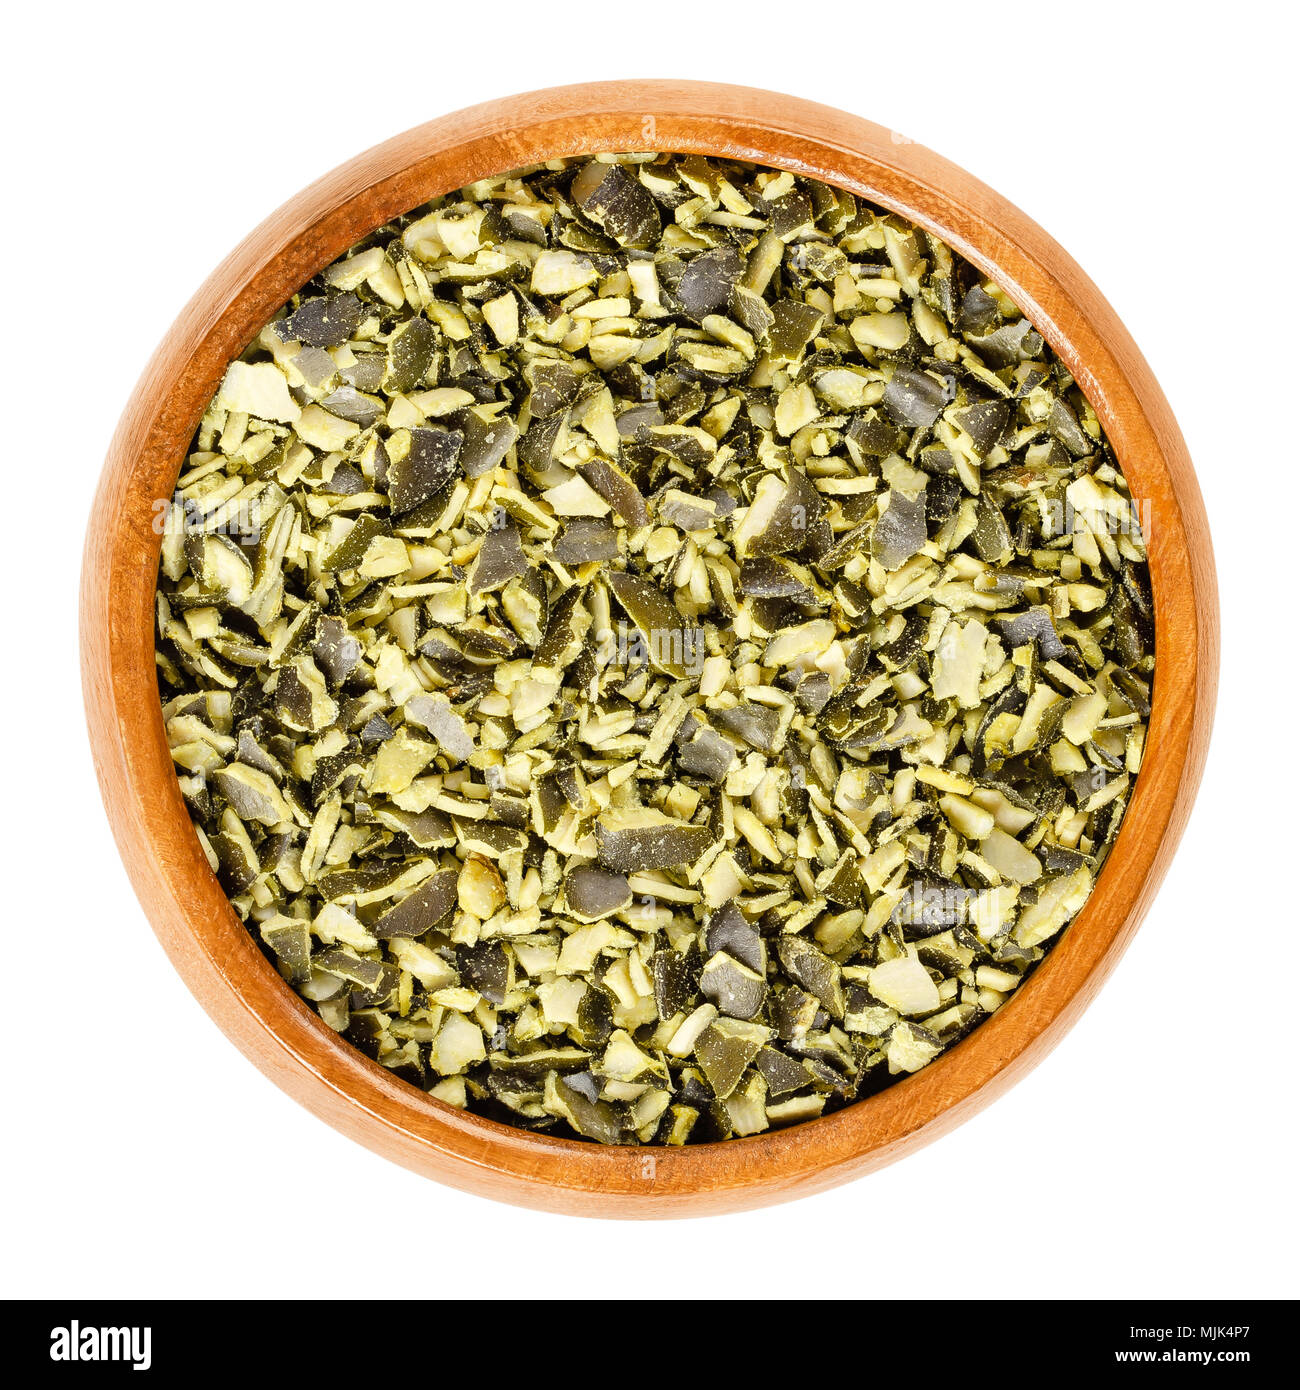 Roughly chopped raw pepita pumpkin seeds in wooden bowl, used for cooking. Flat green edible summer squash seeds of Cucurbita pepo. Stock Photo